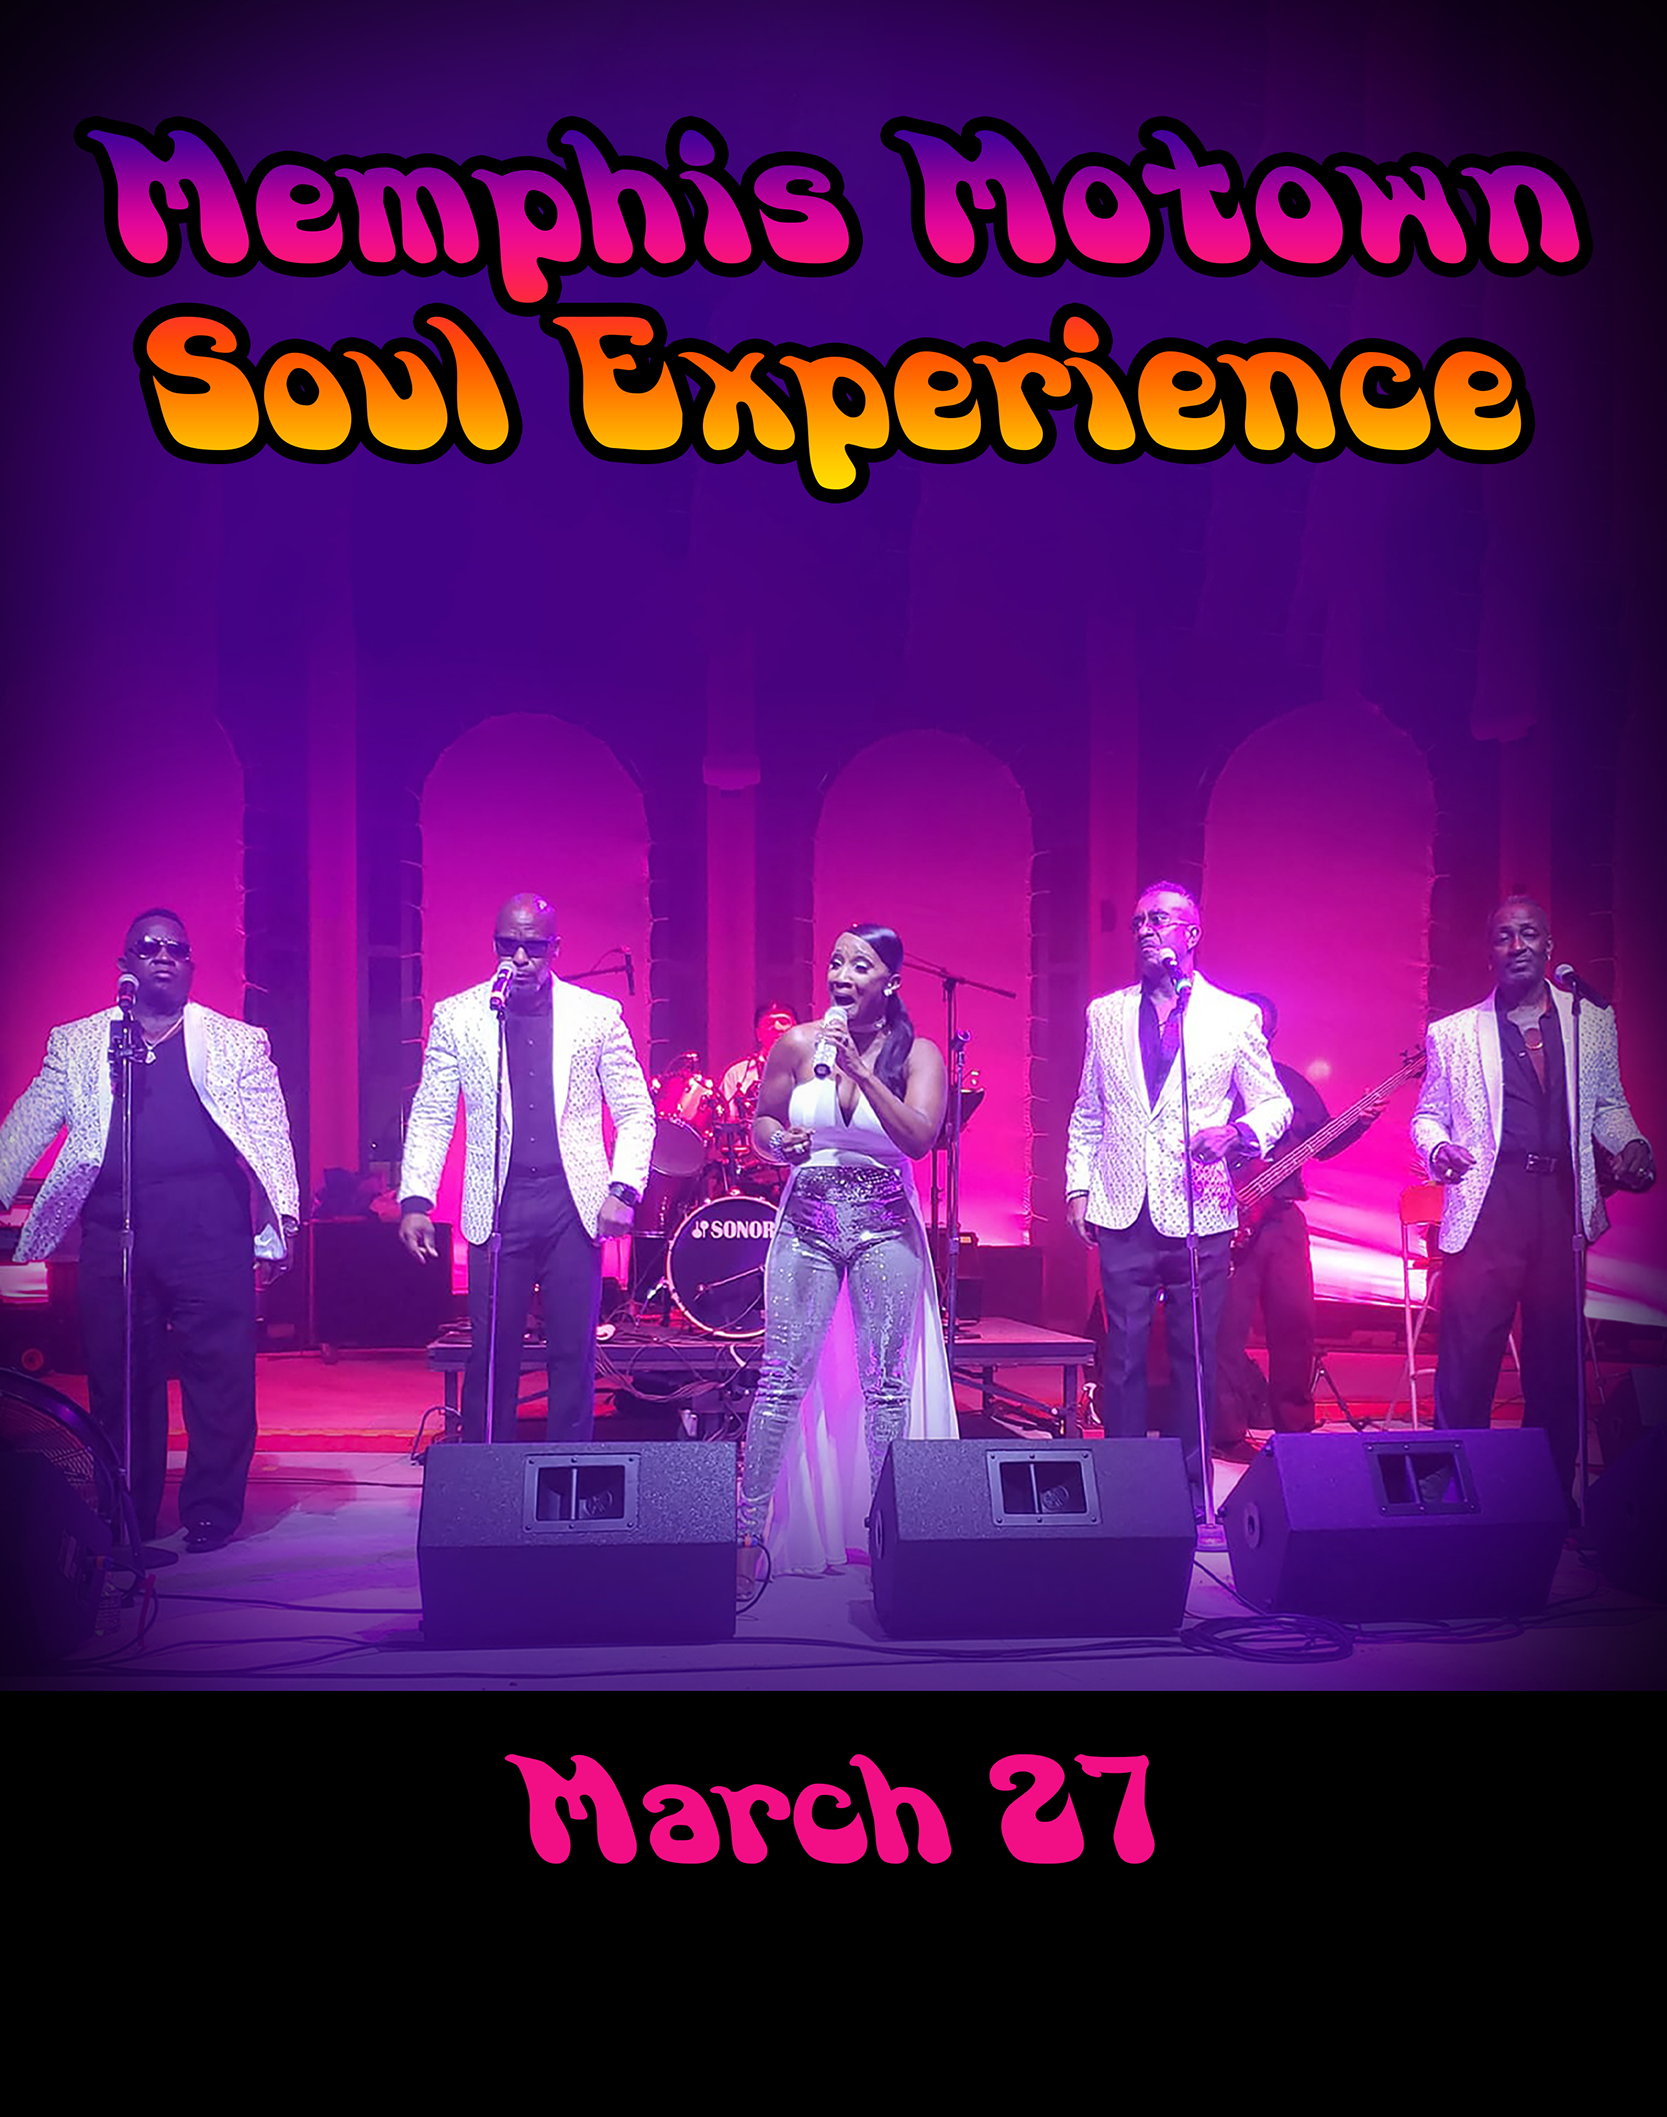 Memphis Motown Soul Experience on March 27th